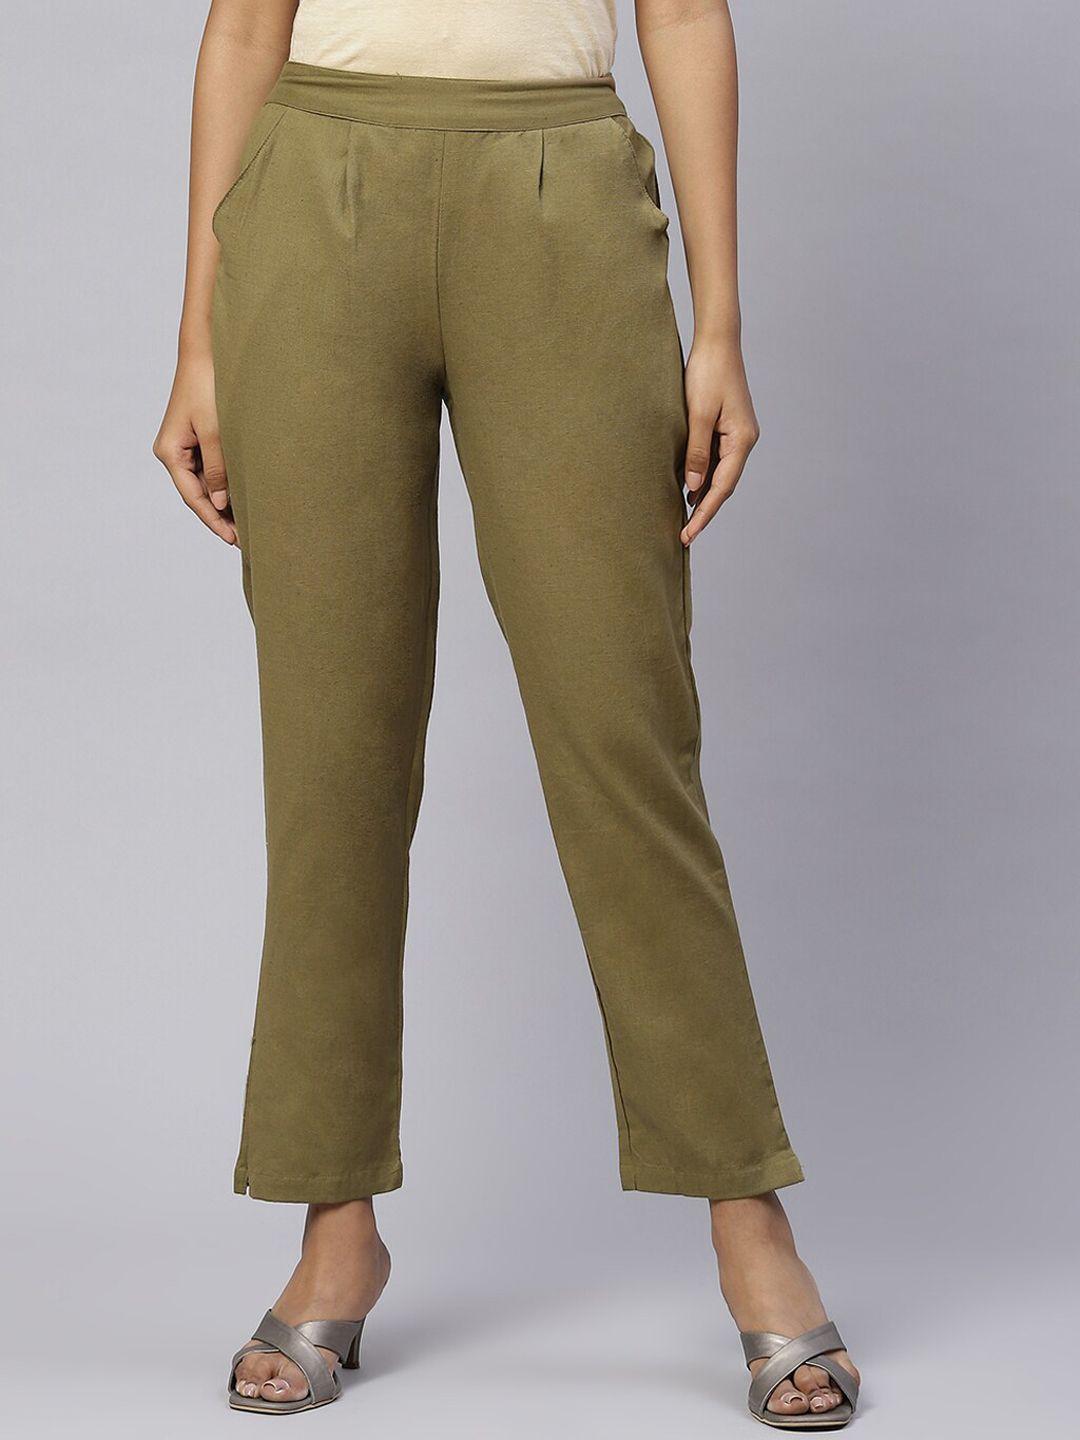 iridaa jaipur women olive green solid regular fit mid-rise casual trousers